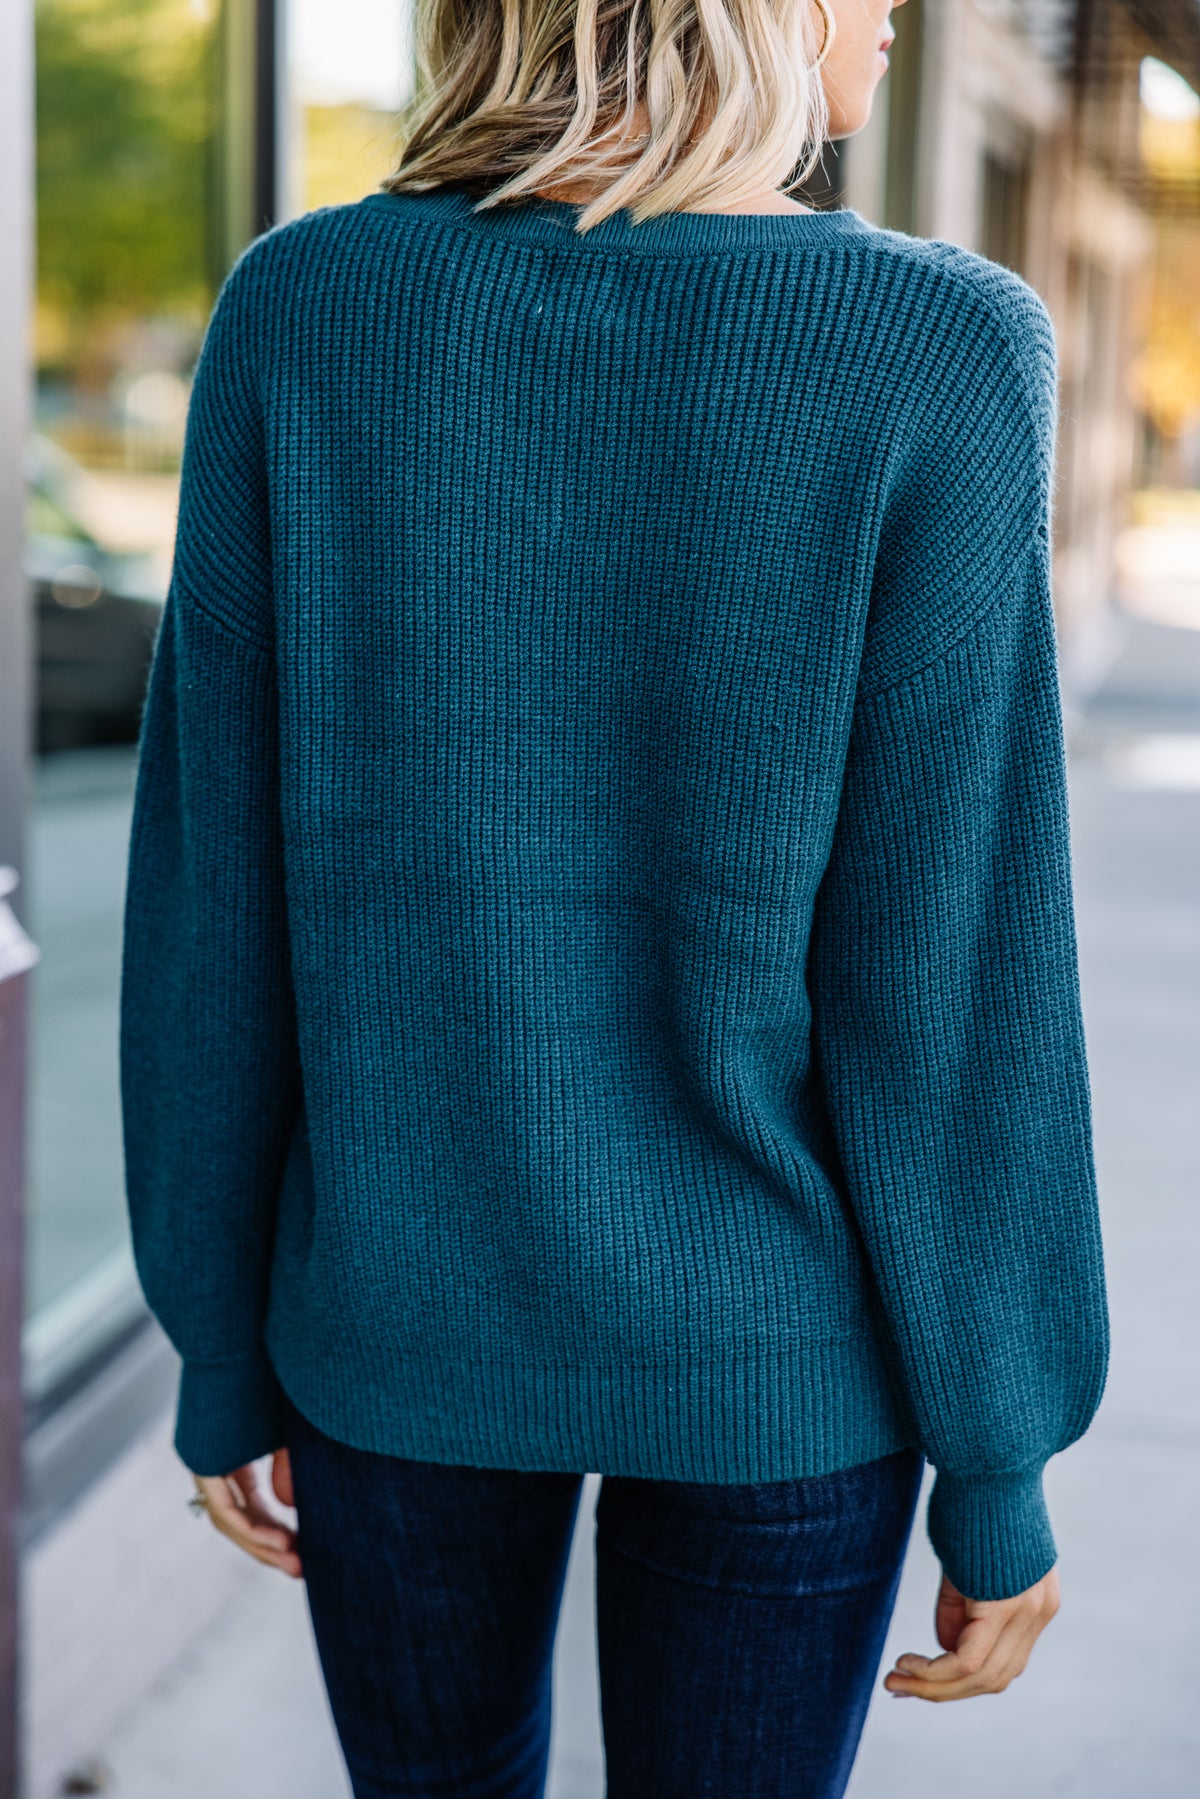 More To Love Teal Green Sweater – Shop the Mint